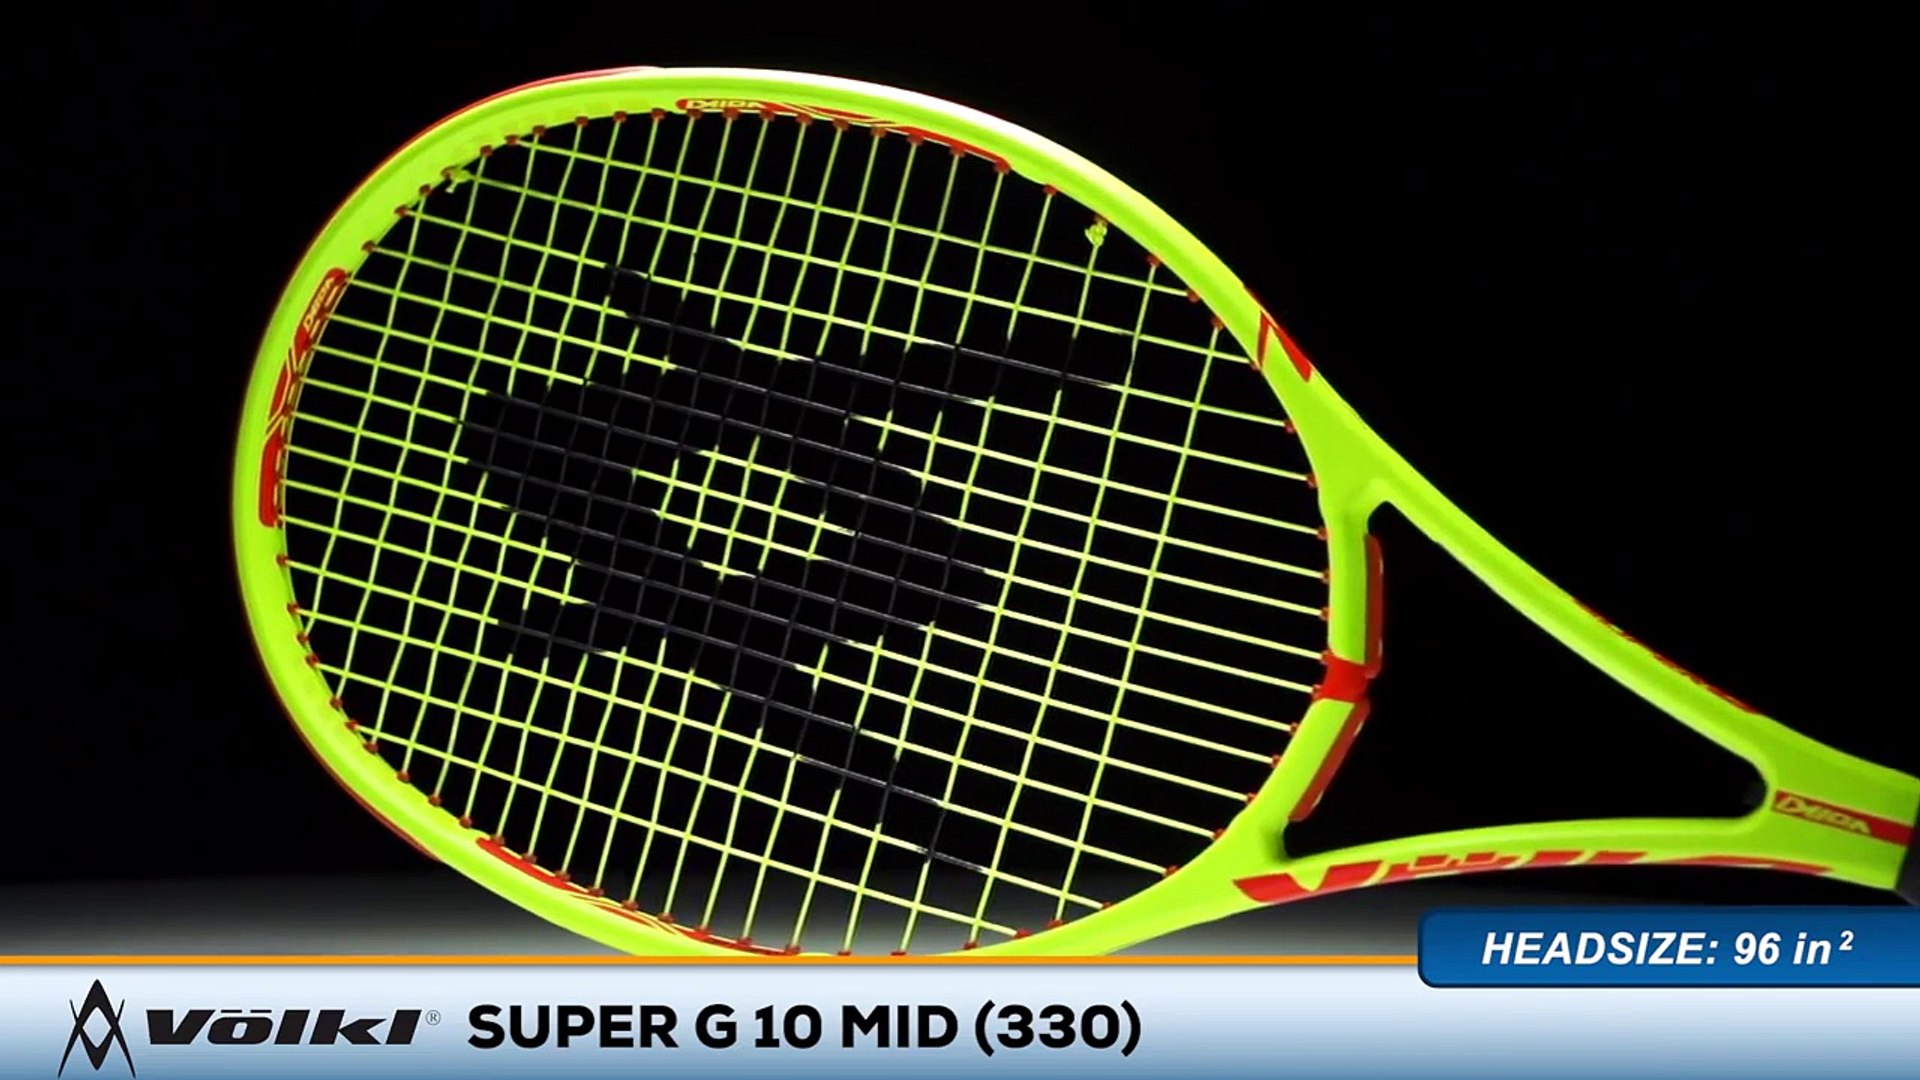 Volkl Super G 10 Mid (330g) Racquet Review - video Dailymotion